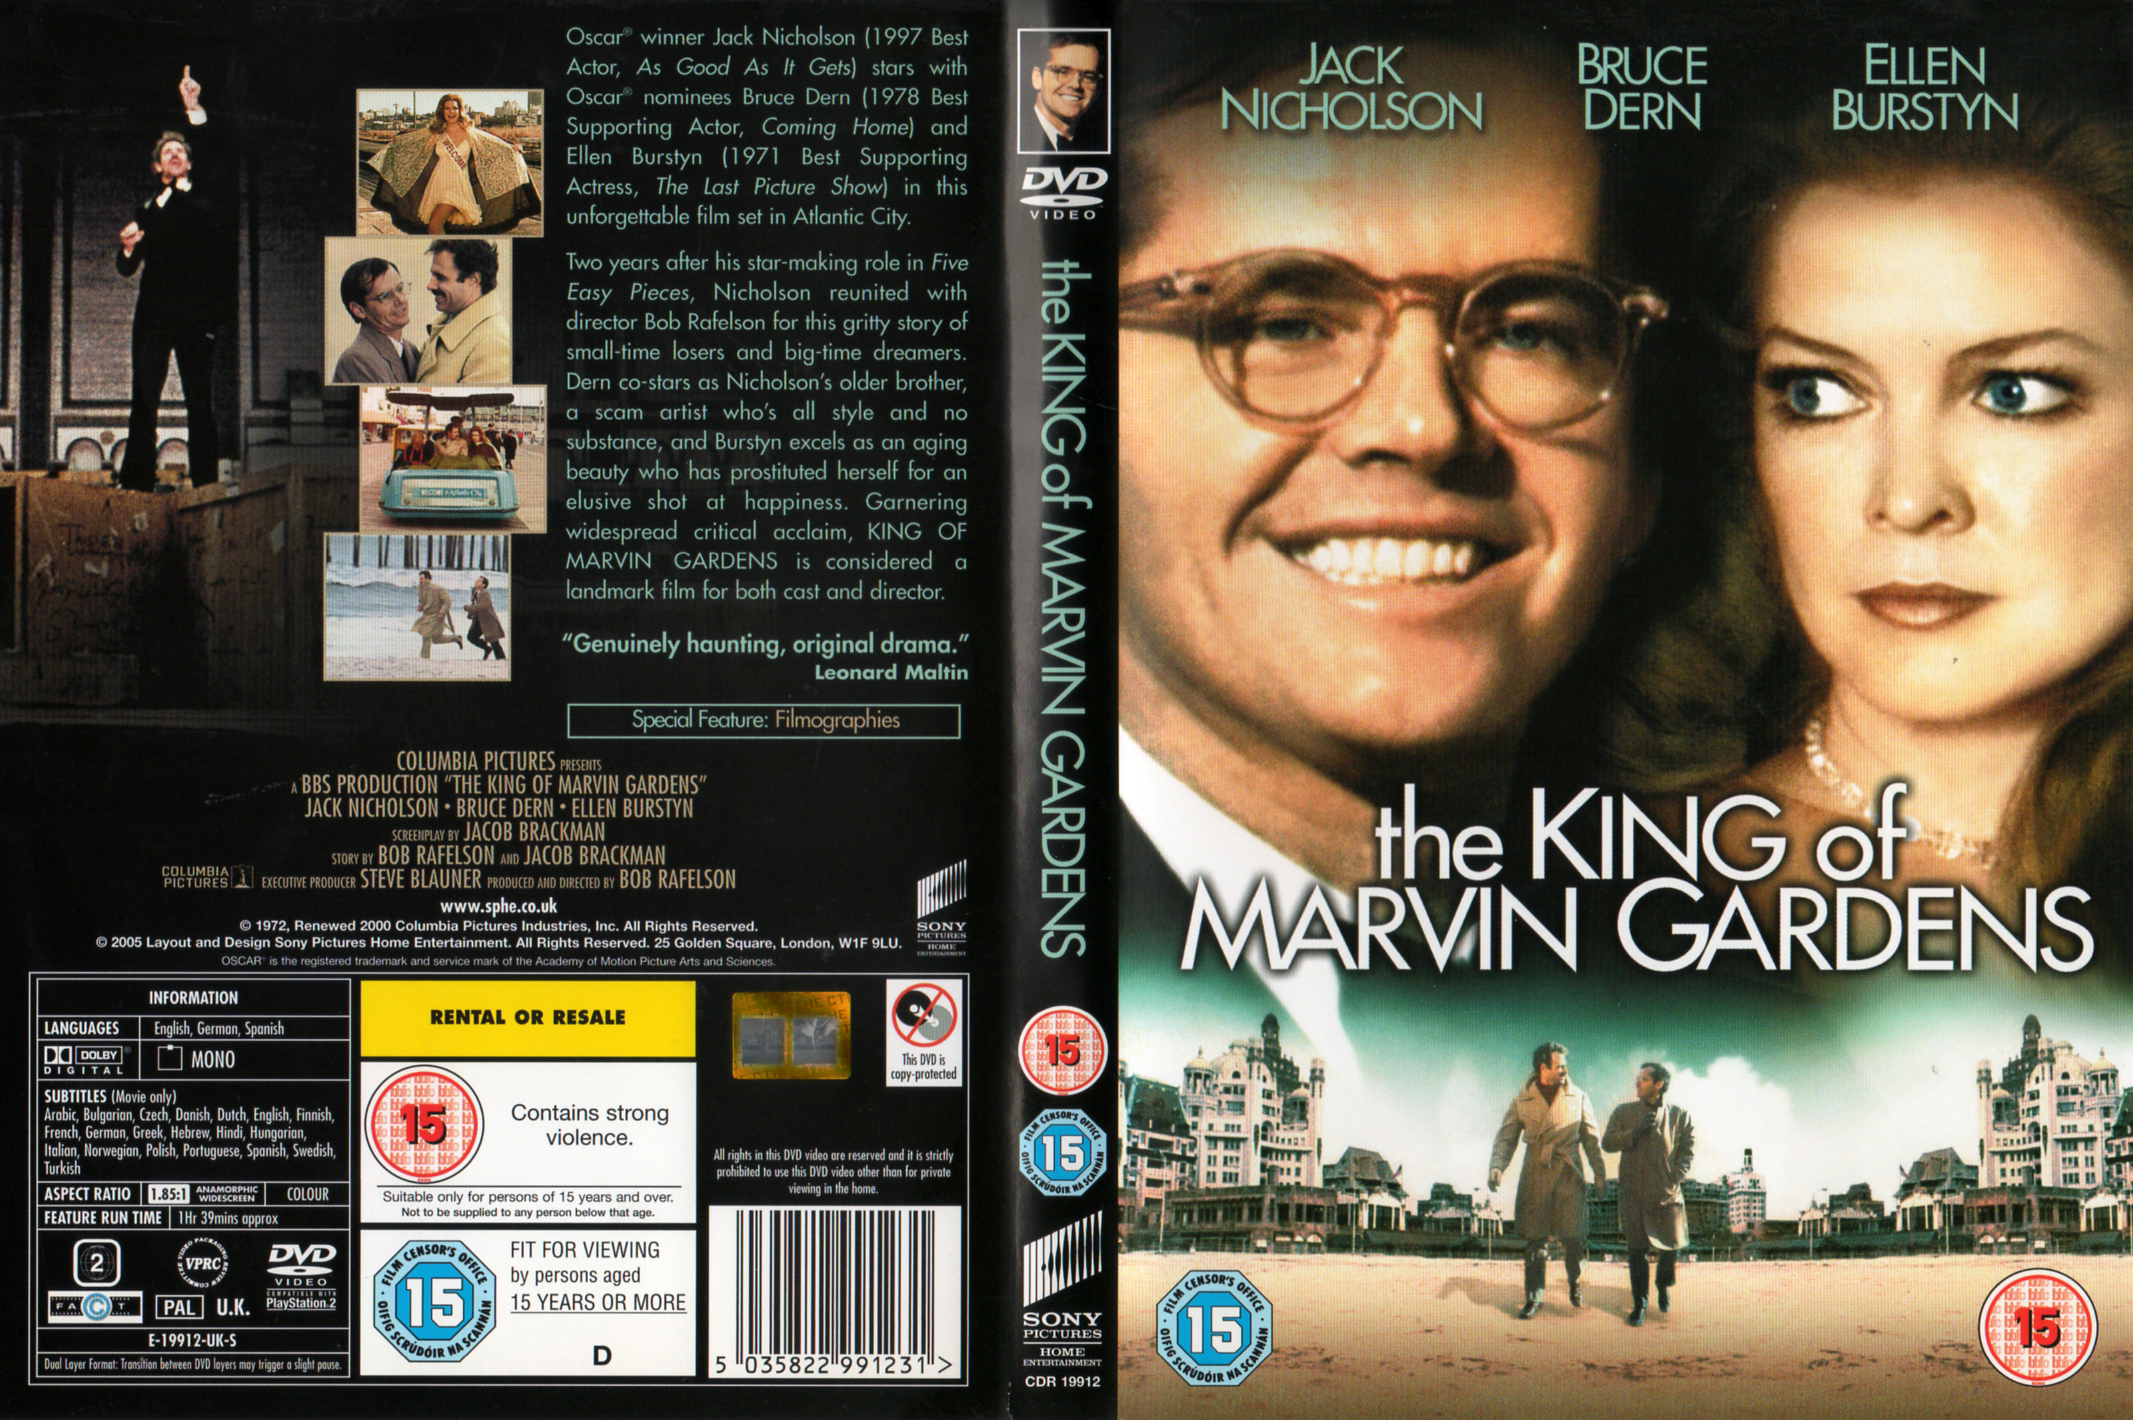 Jaquette DVD The King of Marvin Gardens